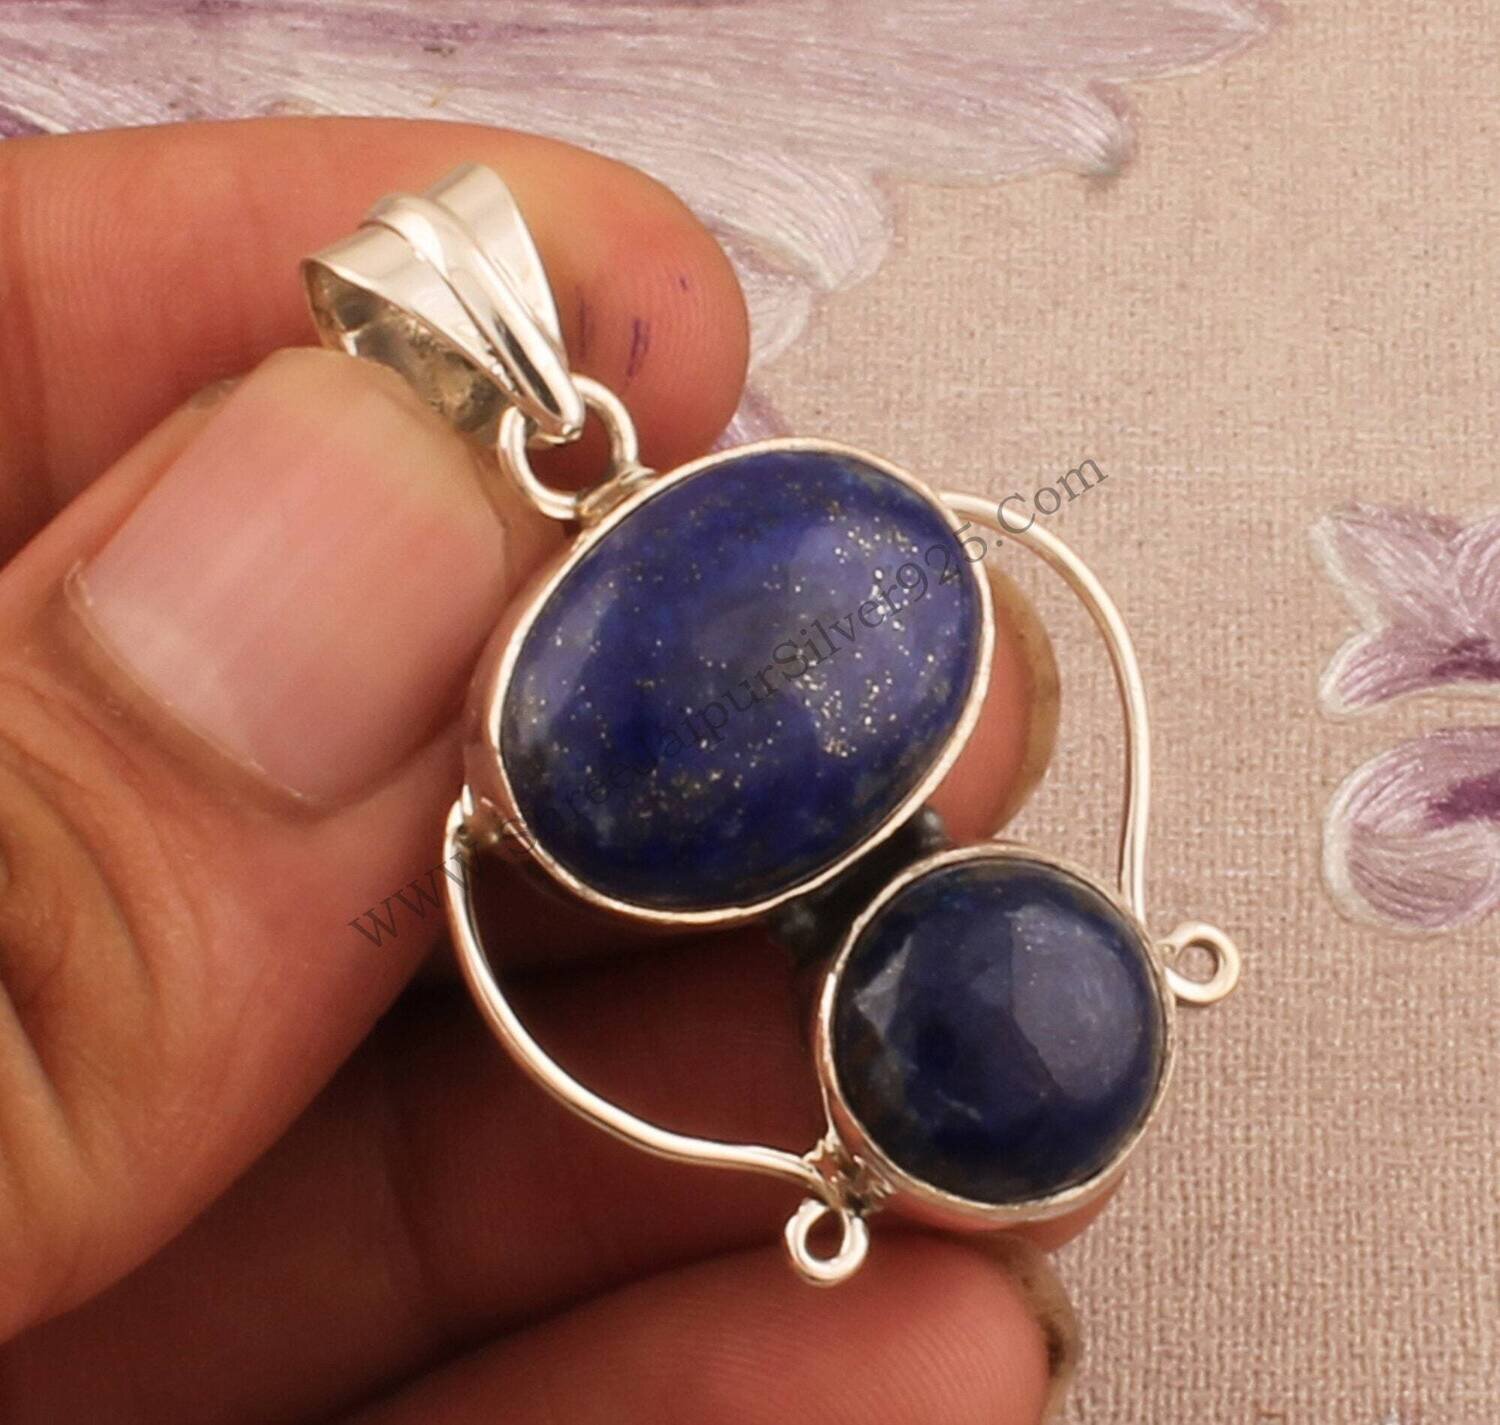 AAA+Quality Lapis Gemstone Handcrafted Pendant With Double Stone Boho Pendant 925-Adjustable Solid Silver Gift For You ! L#-284238-P